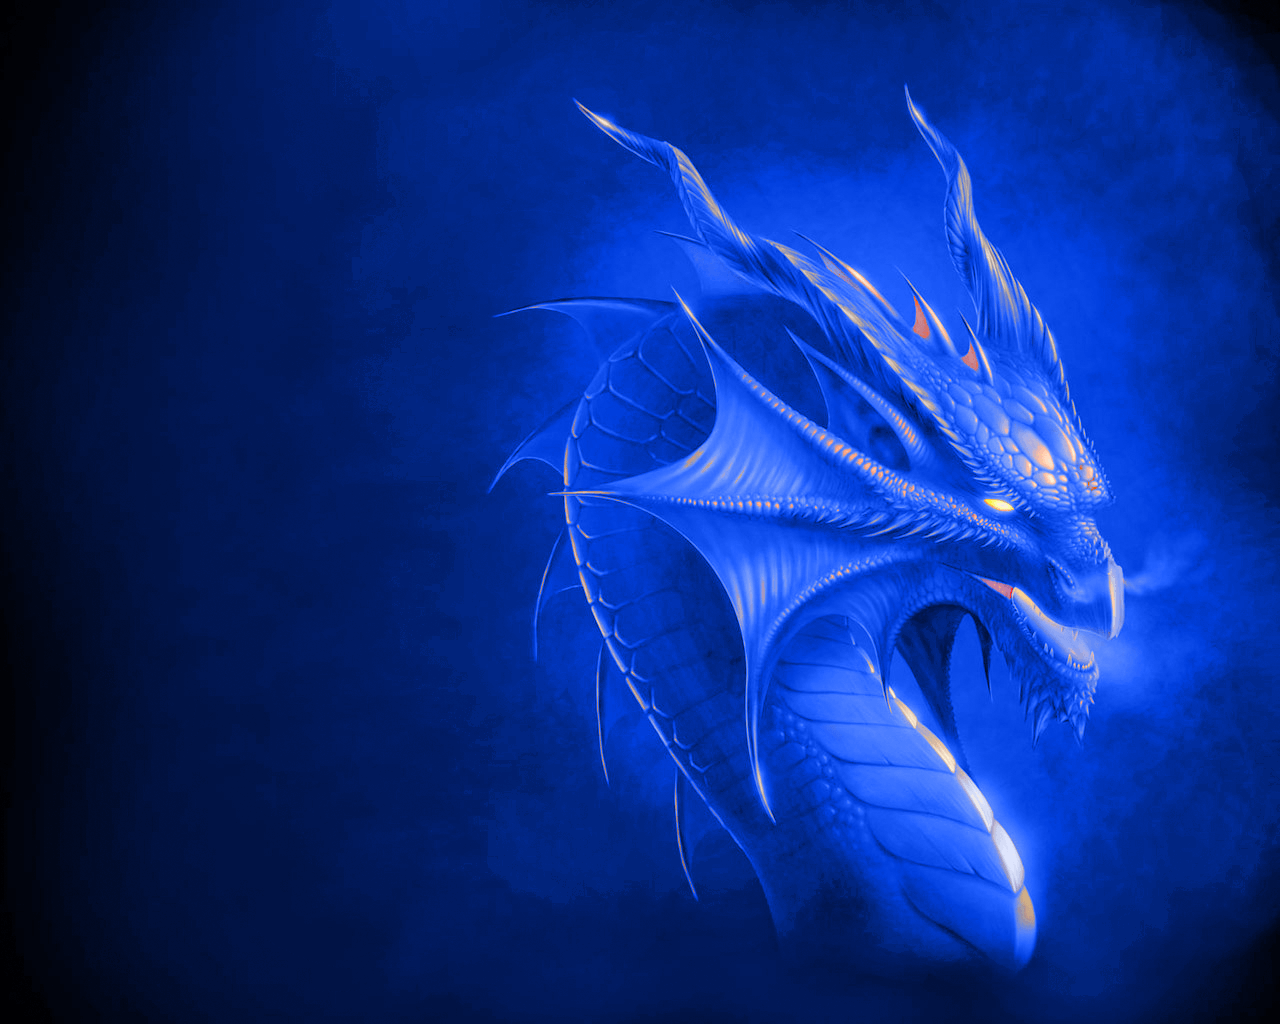 The Blue Dragon Wallpapers